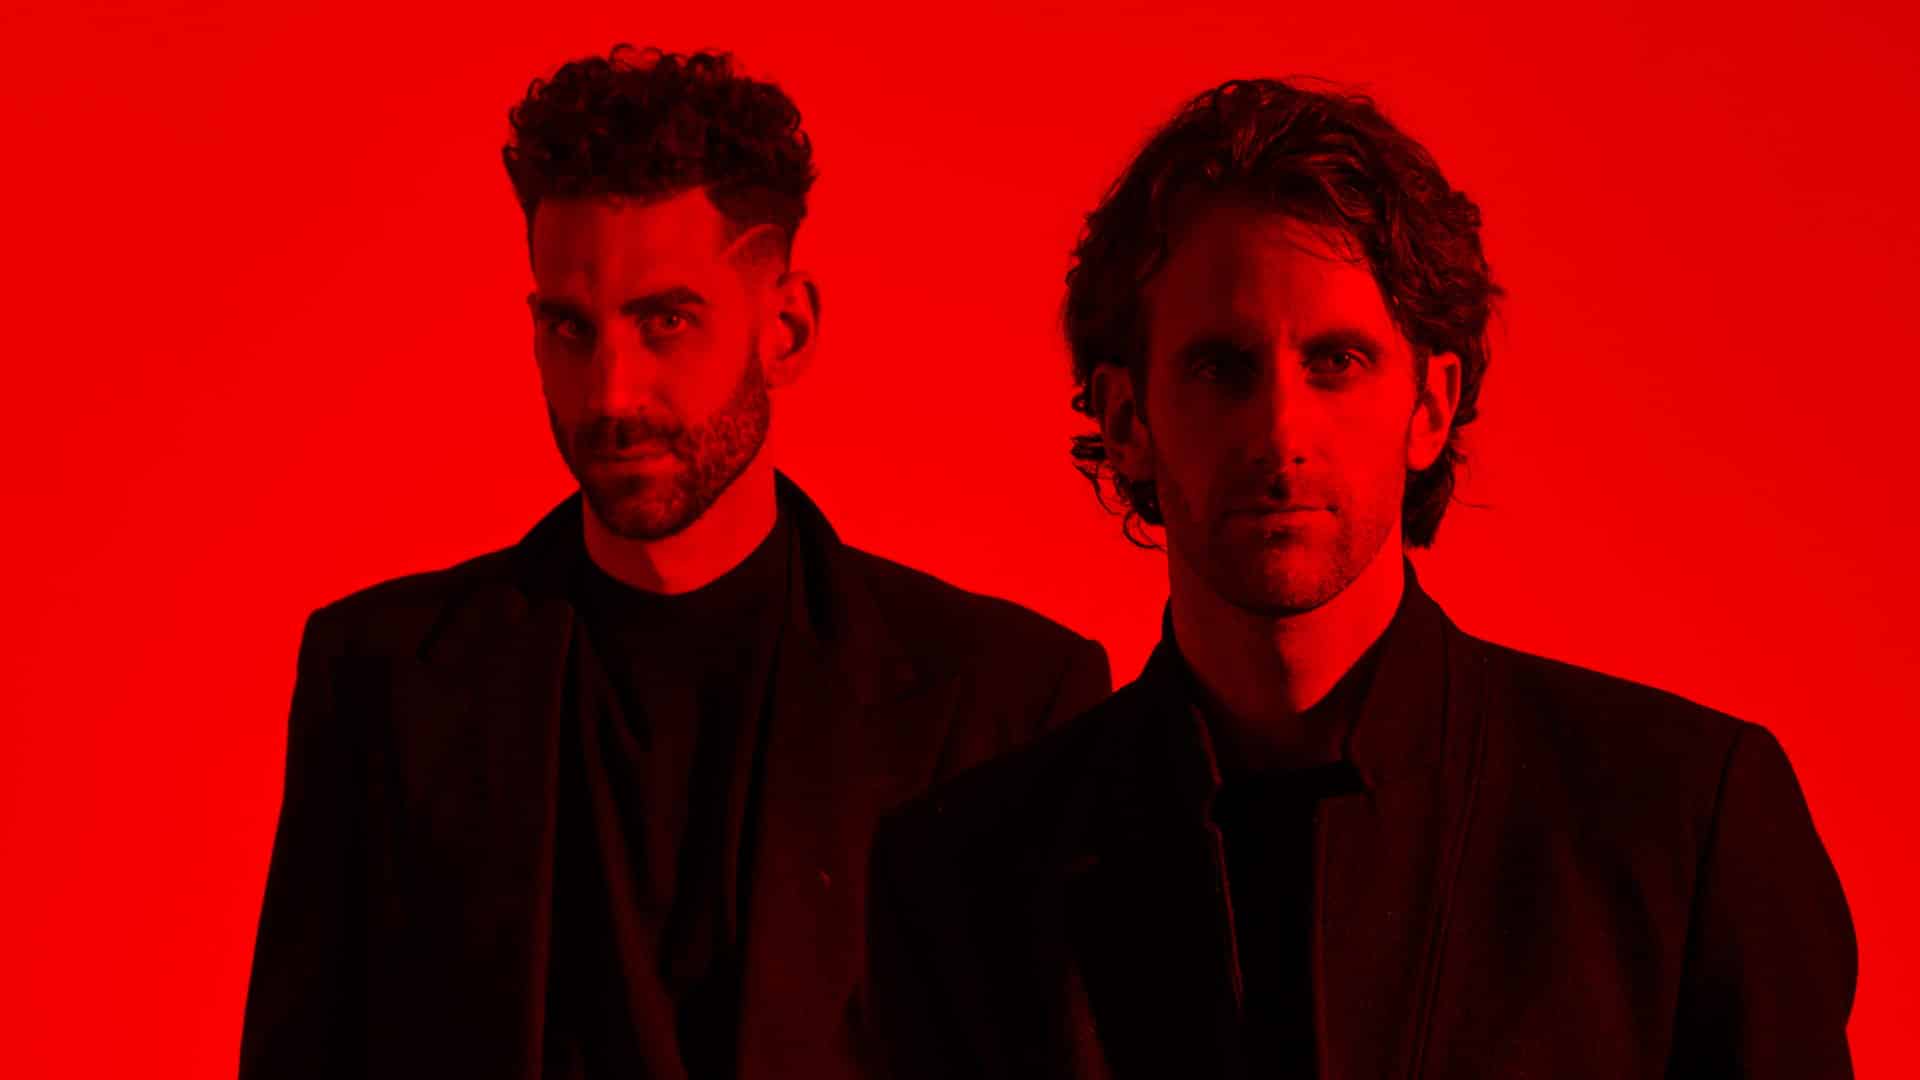 The Listros stand against a vivid red background, exuding a cool confidence in black attire.